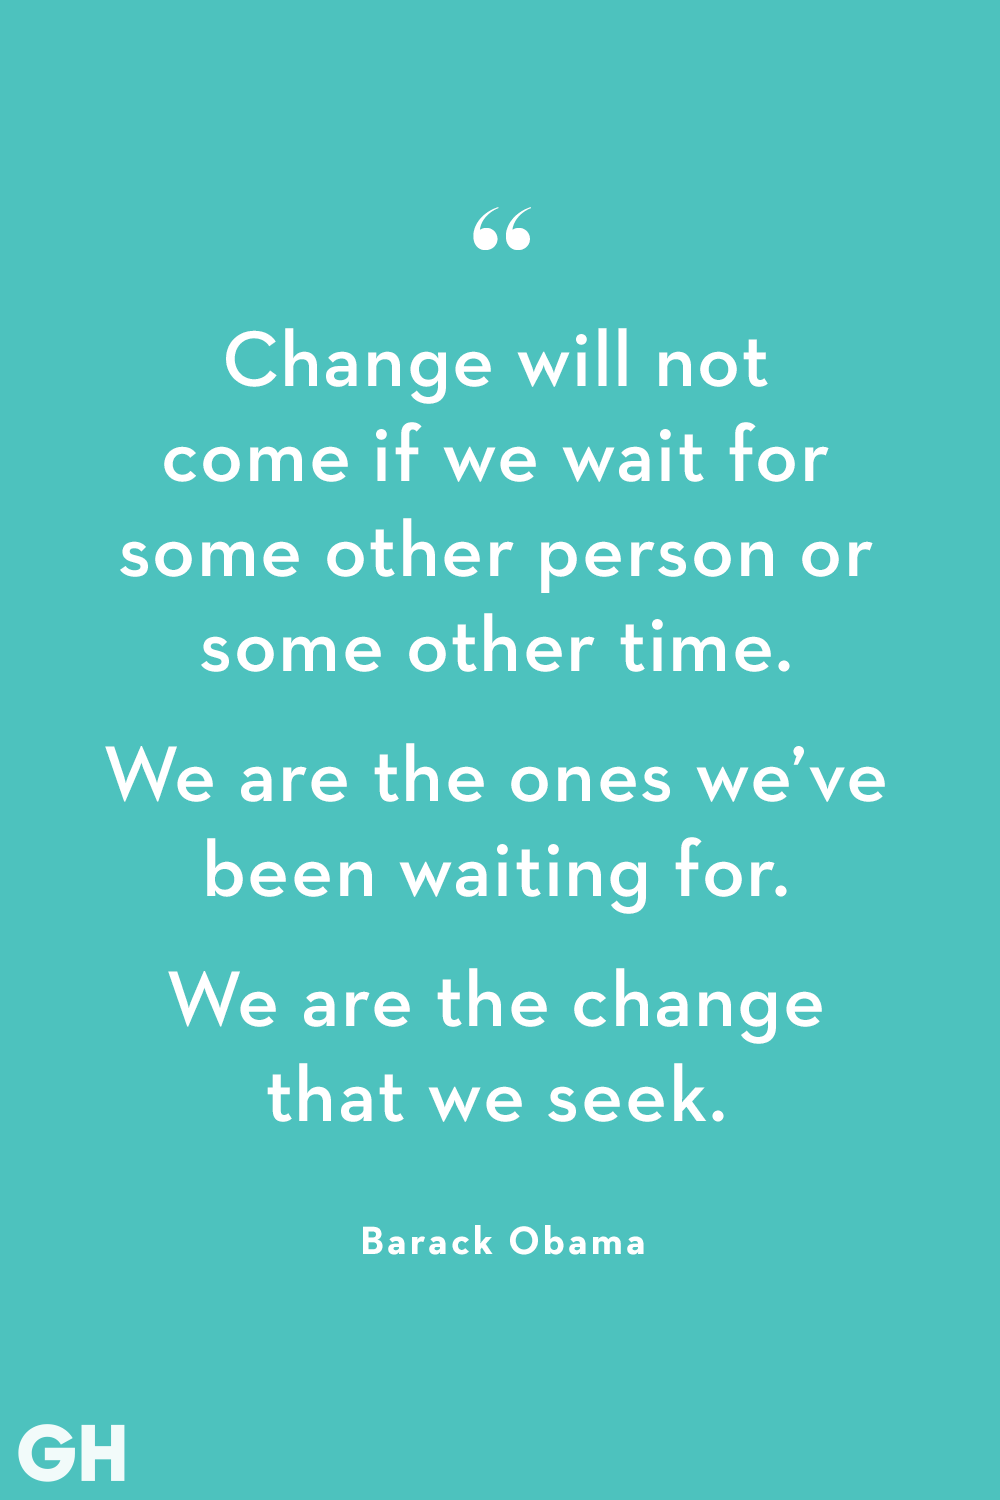 36 Quotes About Change Wise Words About Transitions